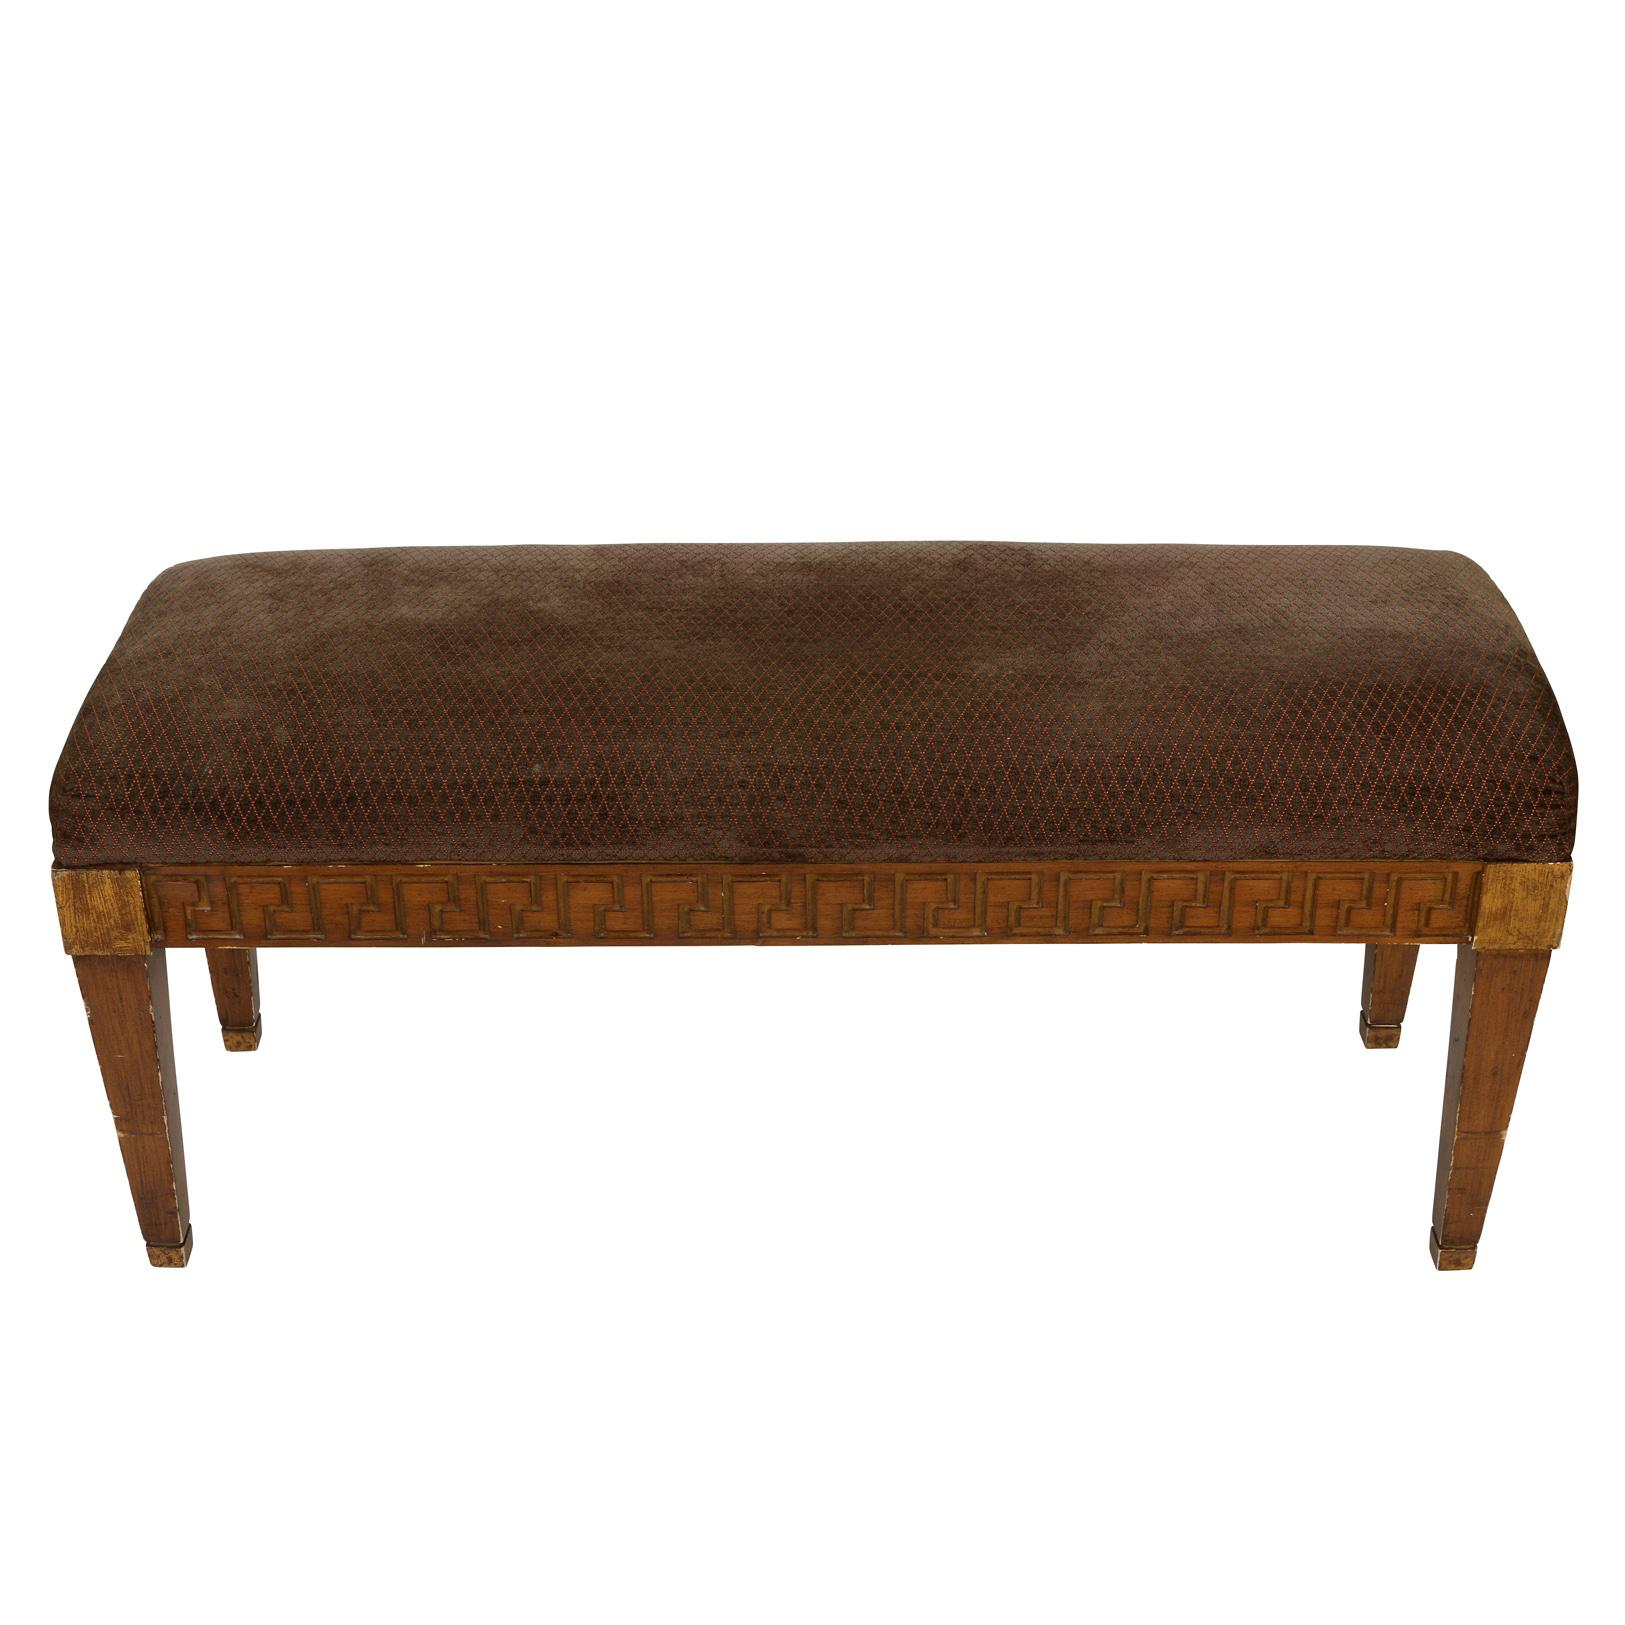 Upholstered Bench with Greek Key Detail In Good Condition For Sale In Locust Valley, NY